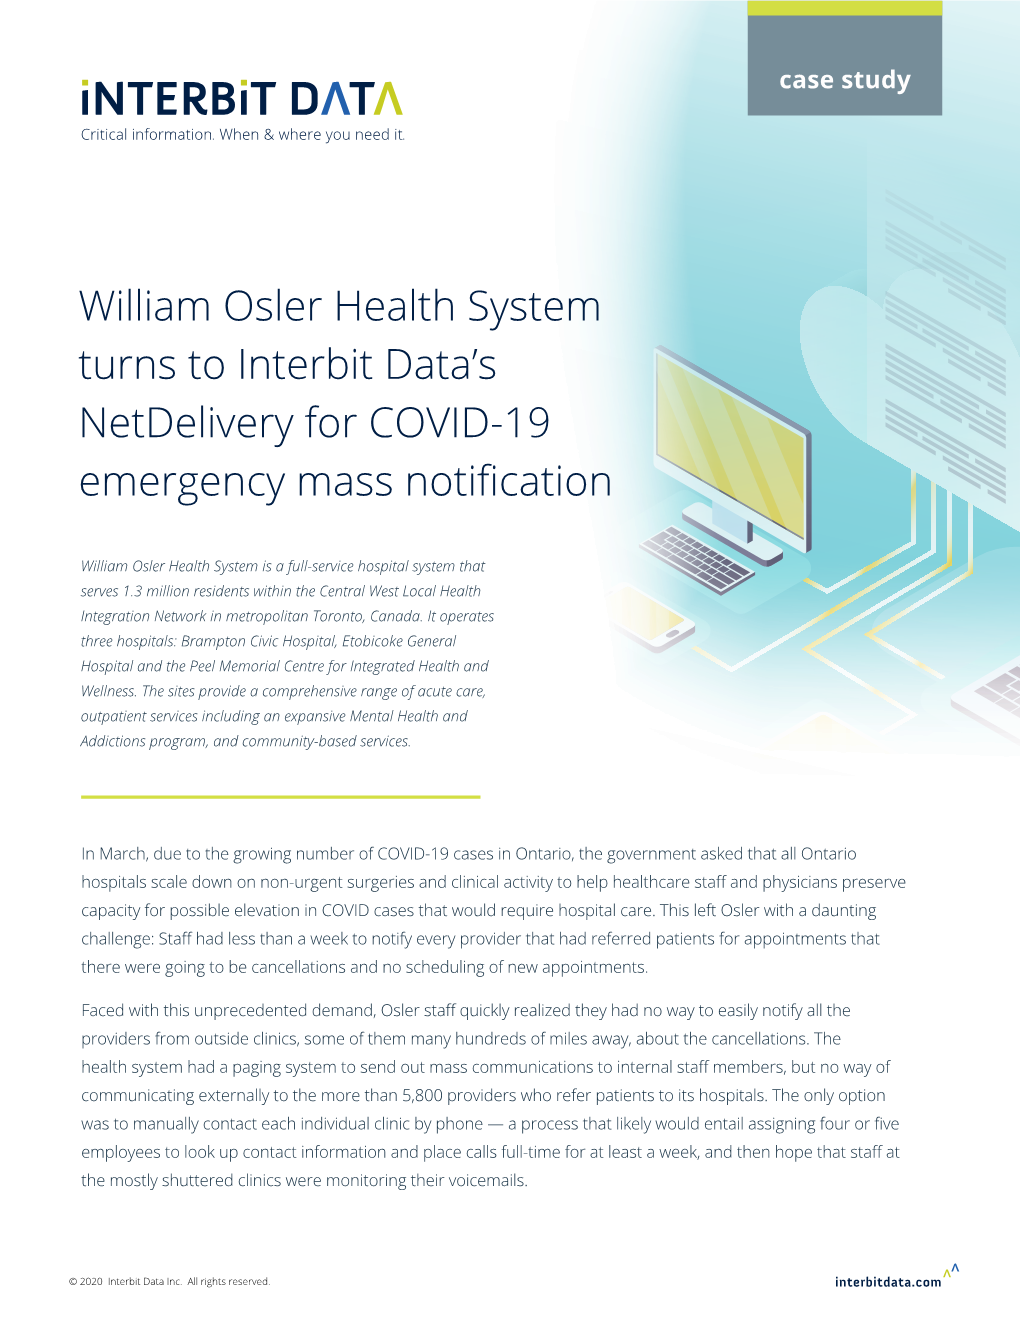 William Osler Health System Turns to Interbit Data's Netdelivery For